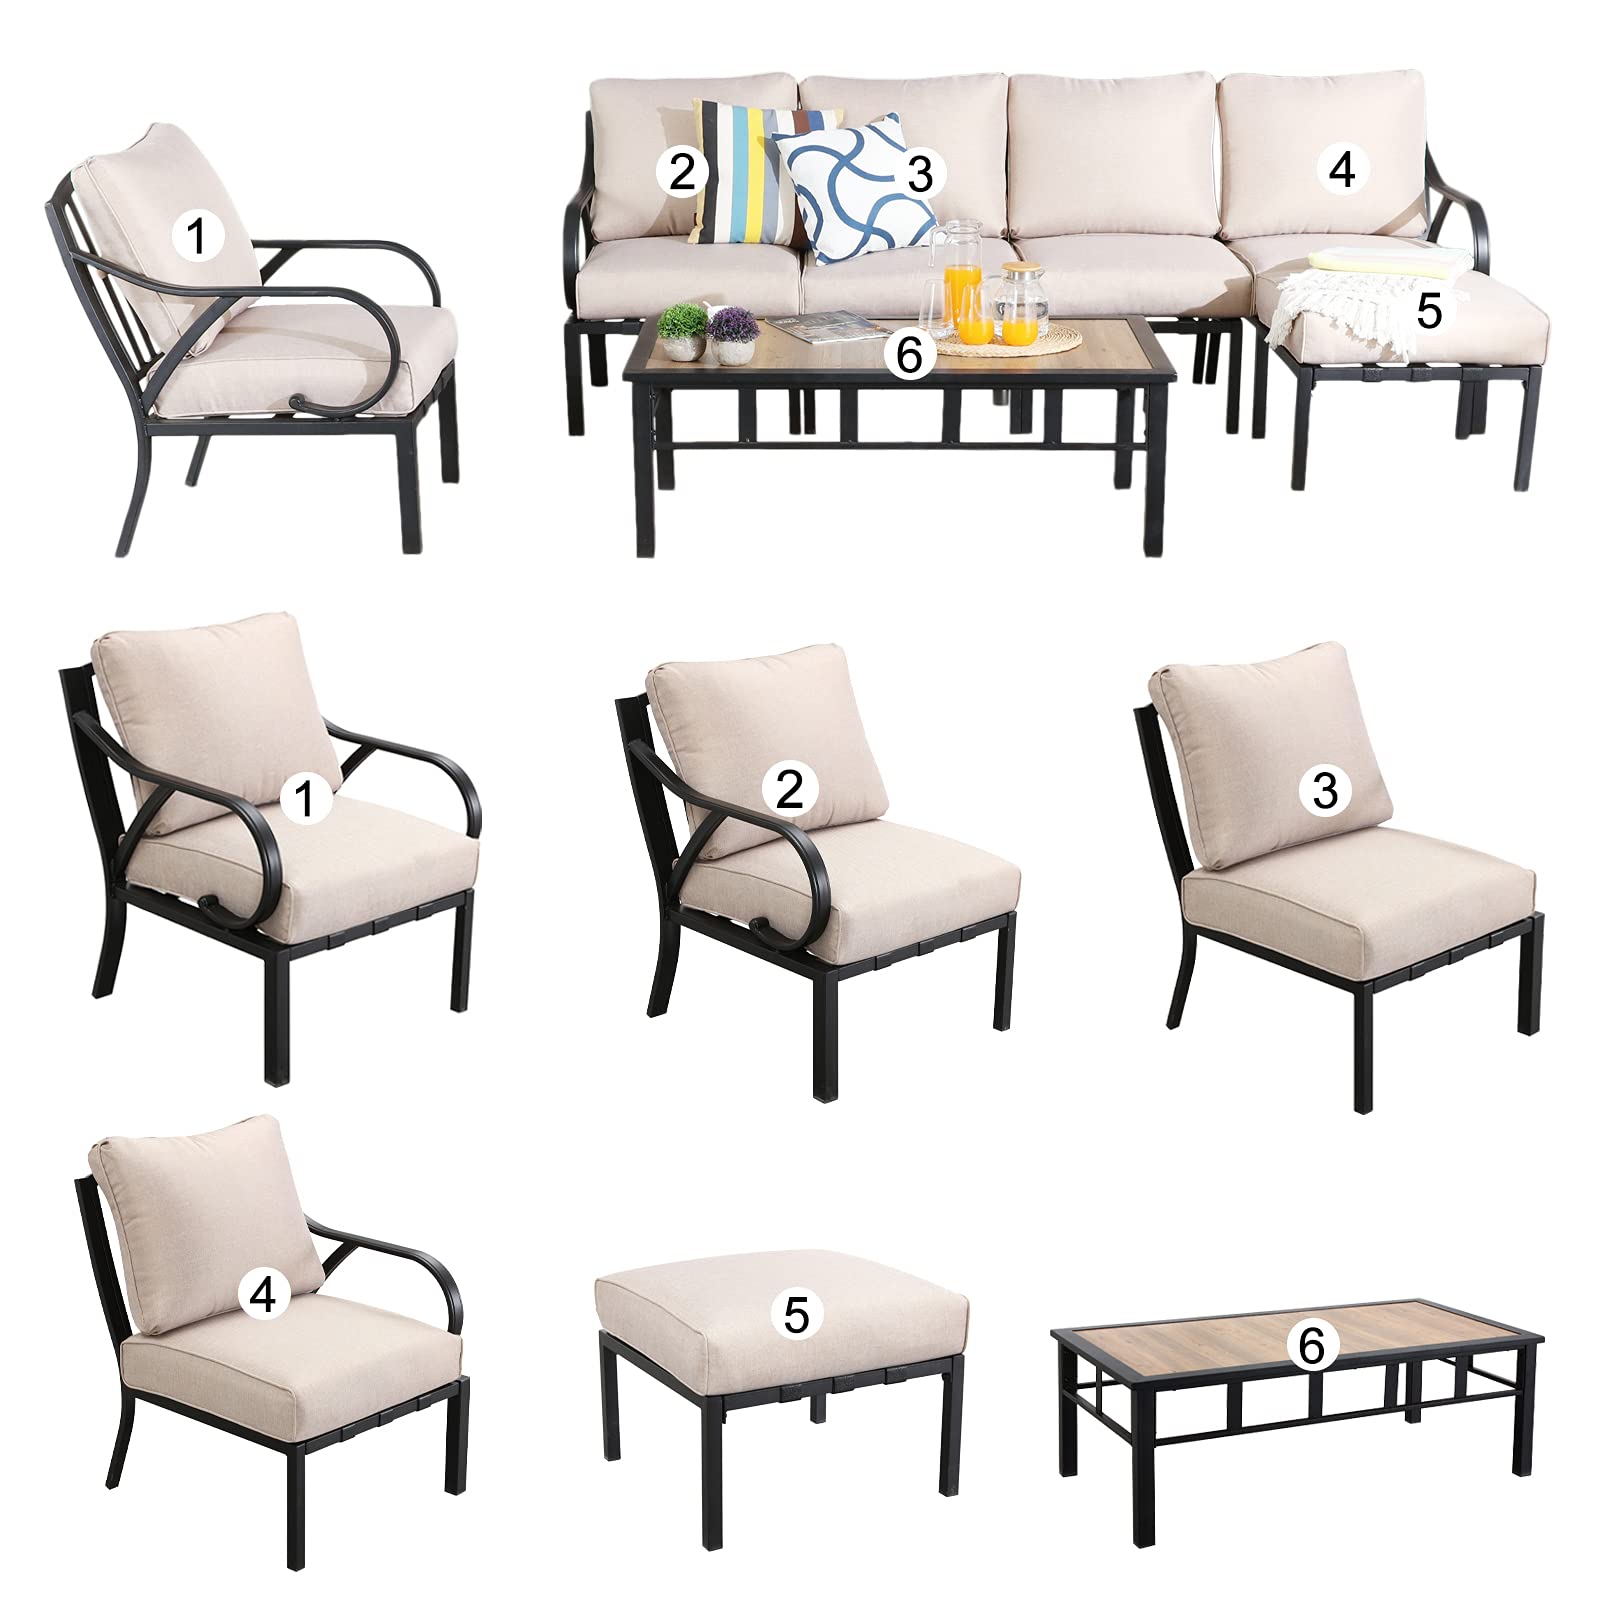 Festival Depot 7pcs Patio Conversation Set Sectional Metal Chairs Couch Sofa with Thick Cushions Ottoman and Coffee Table All Weather Outdoor Furniture for Garden Backyard Balcony, Beige